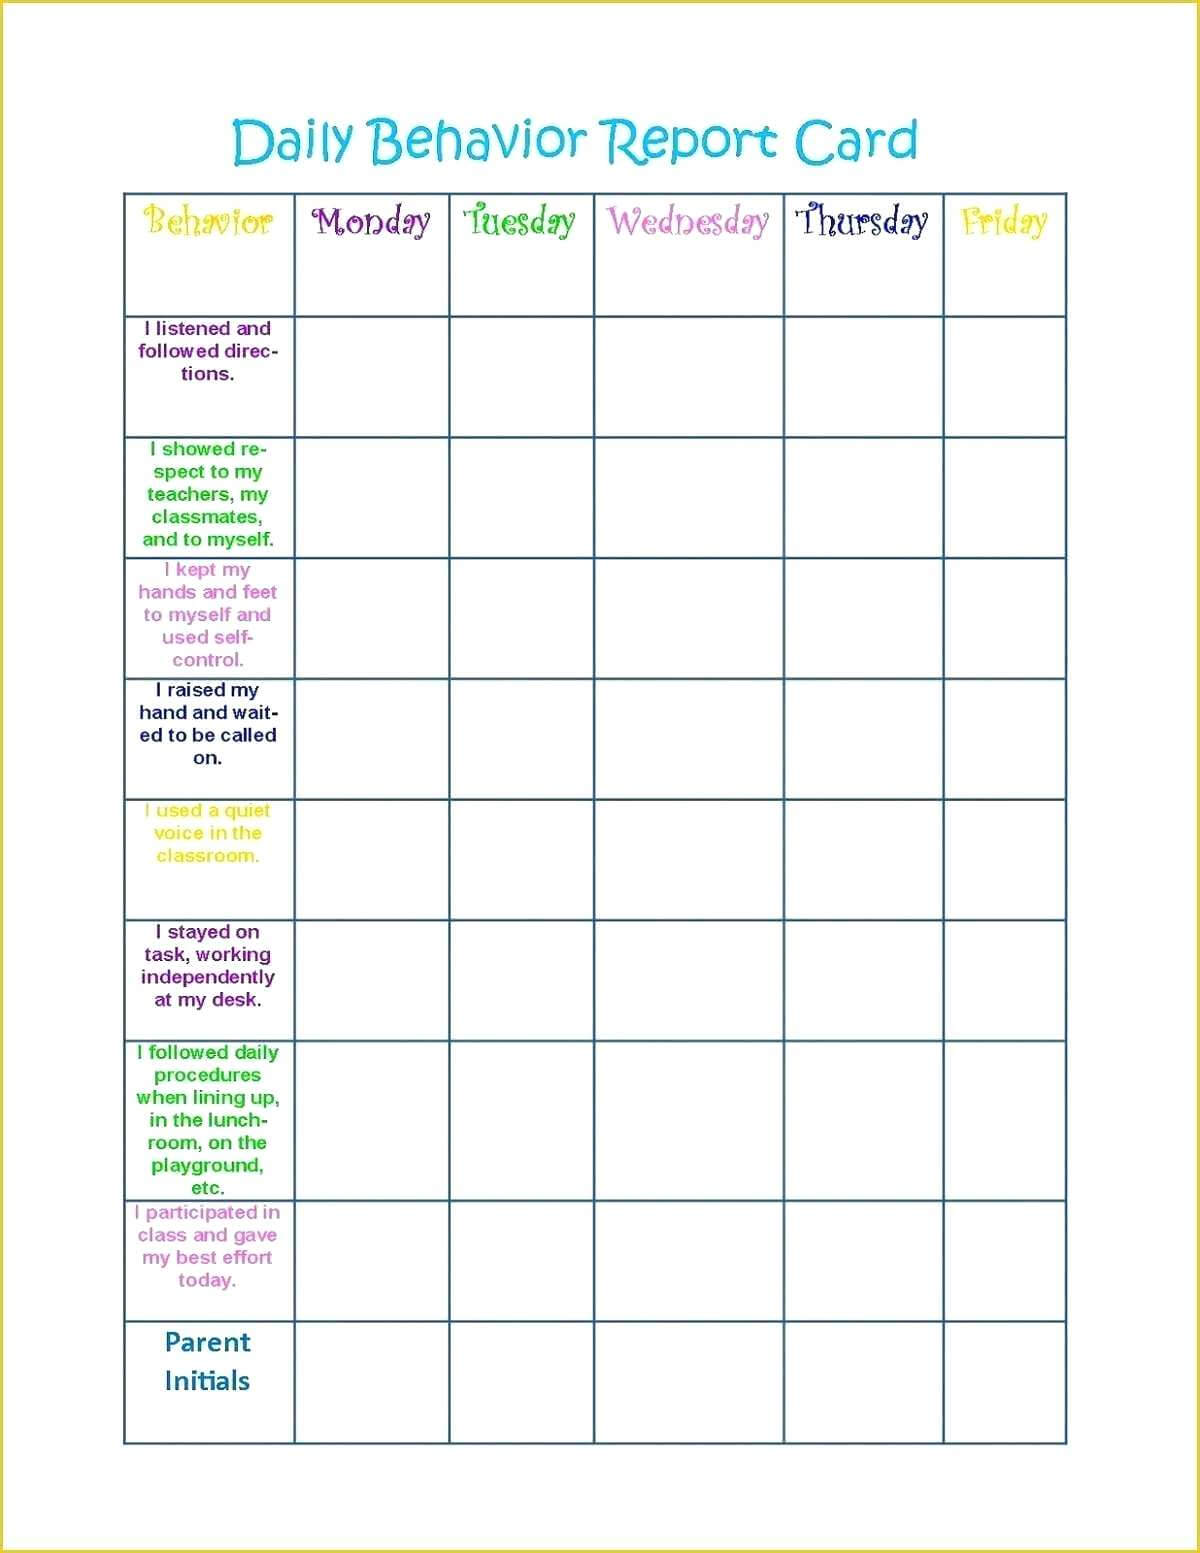 021 Free Behavior Chart Template Of Daily Printable Colorful With Regard To Daily Behavior Report Template